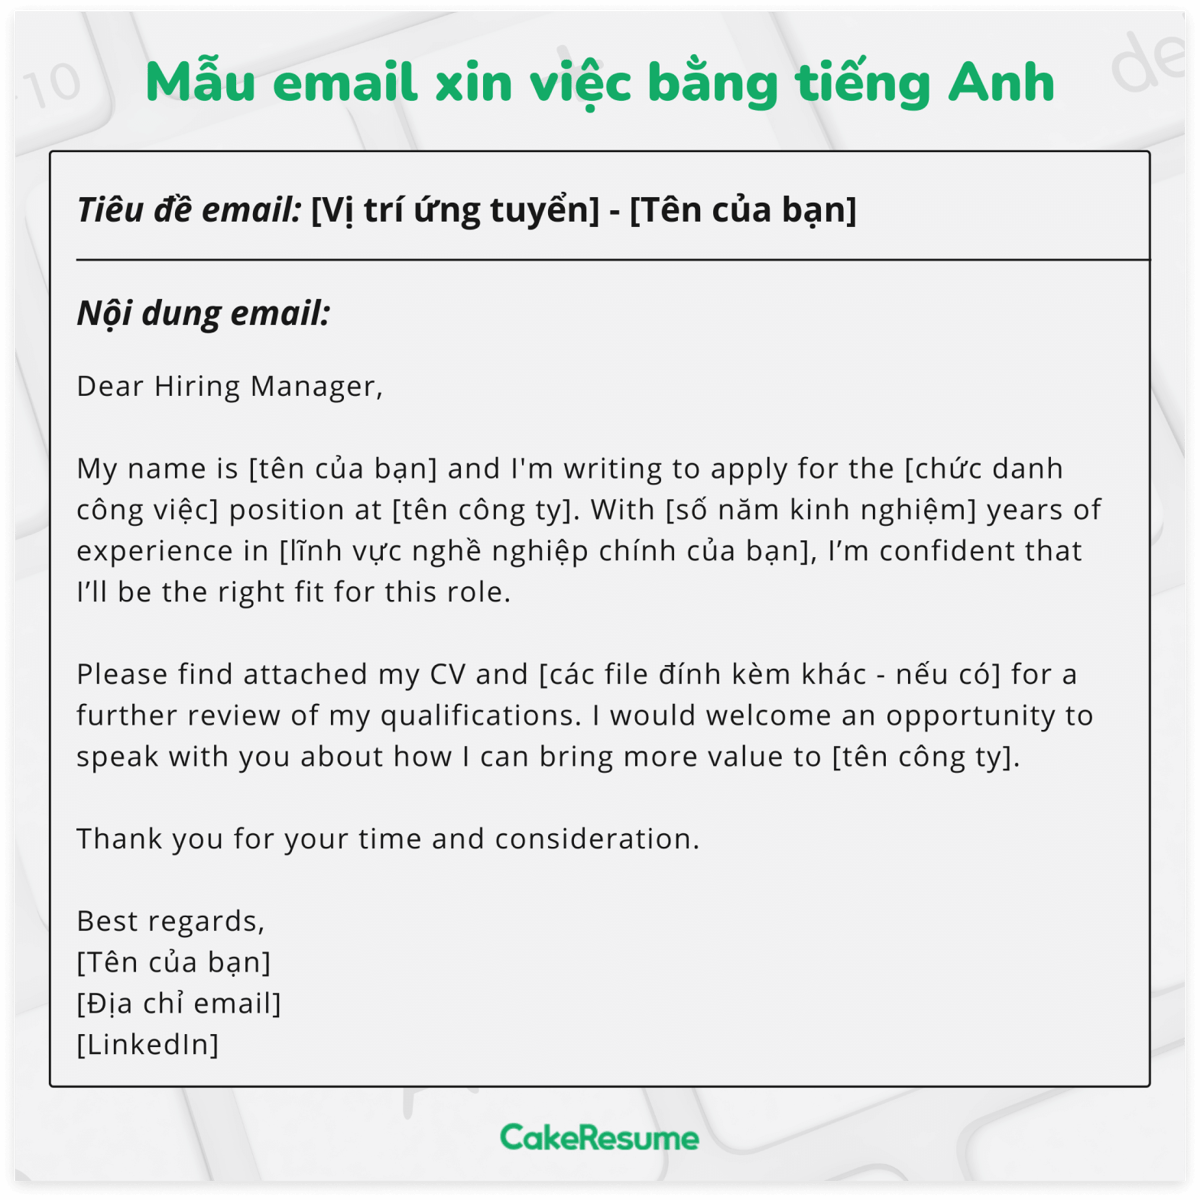 email-xin-viec-tieng-anh